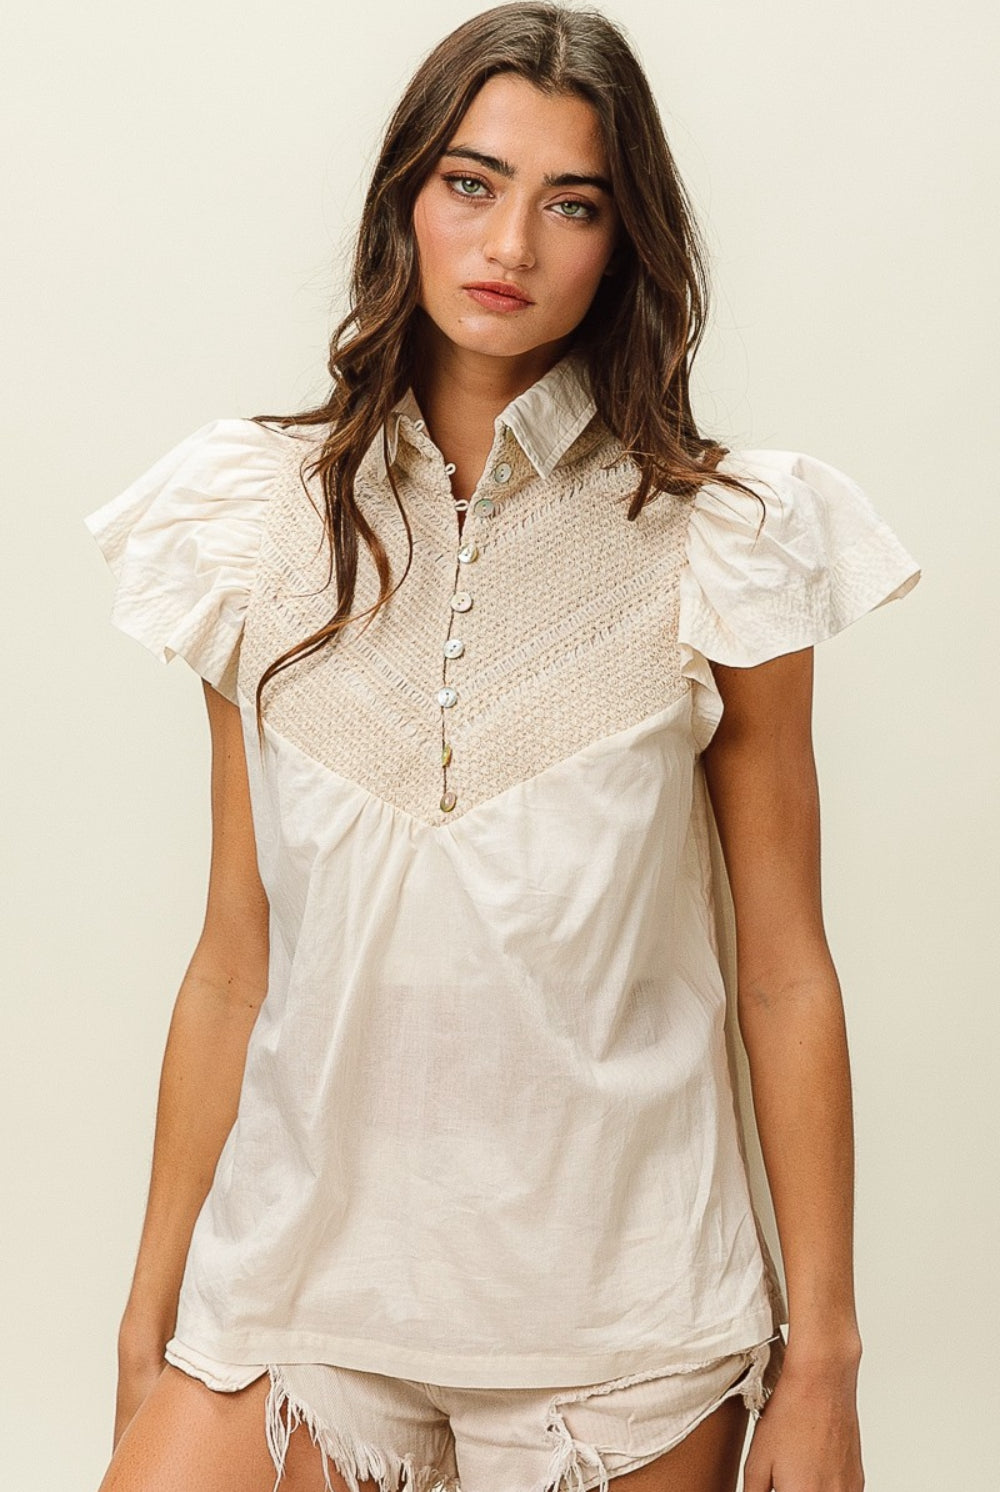 Woman wearing a beige short sleeve top with crochet panel and puff sleeves